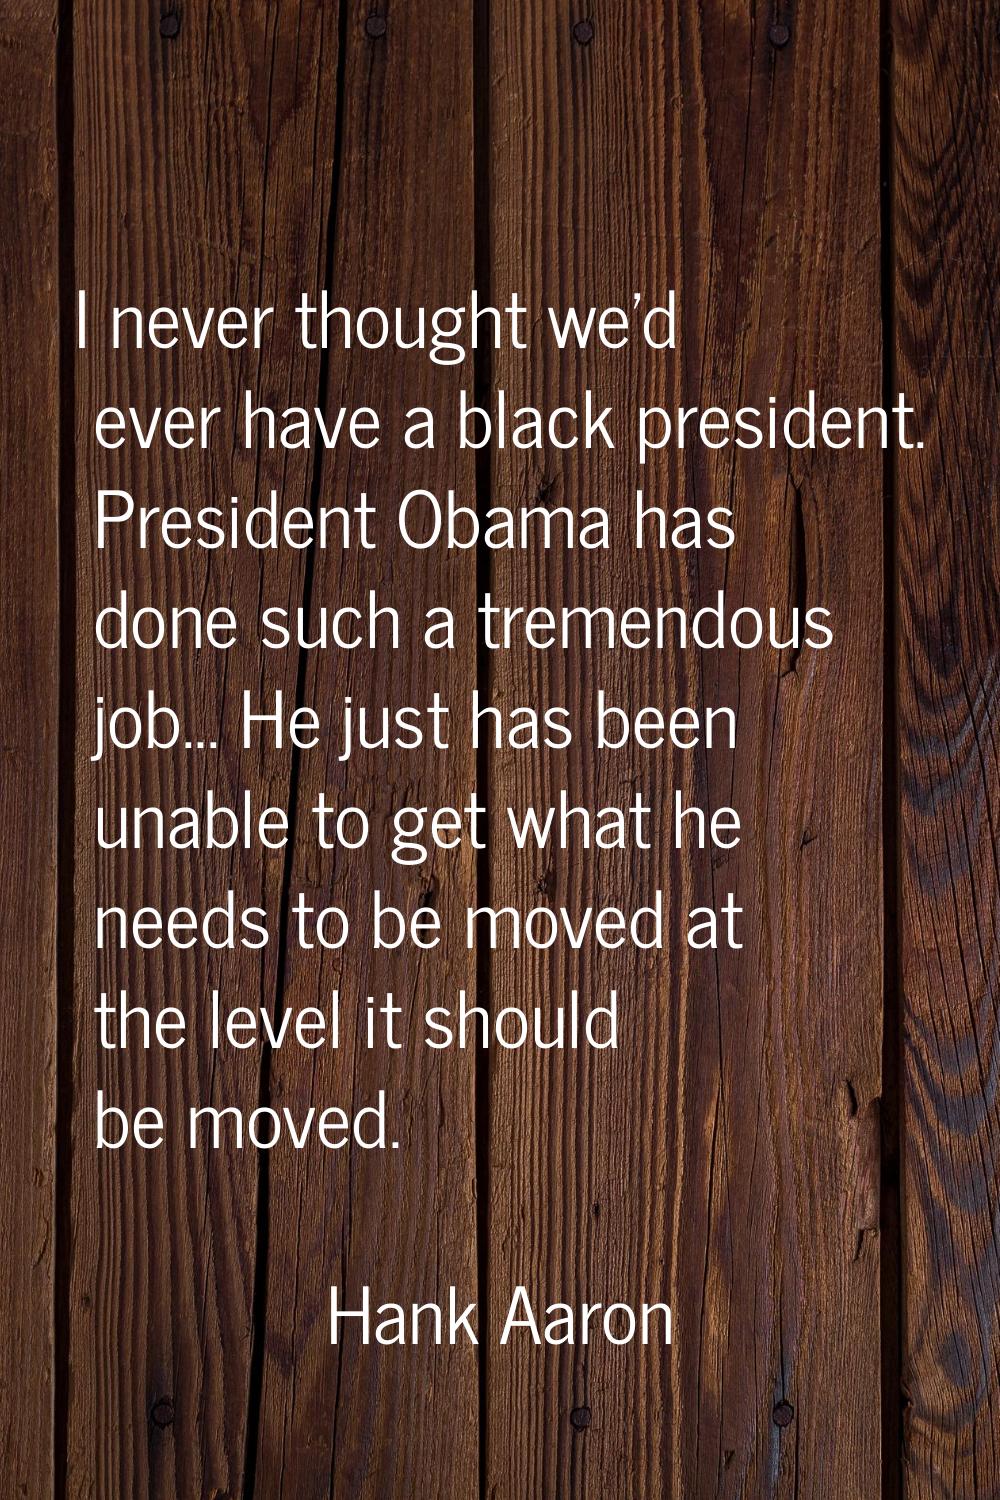 I never thought we'd ever have a black president. President Obama has done such a tremendous job...